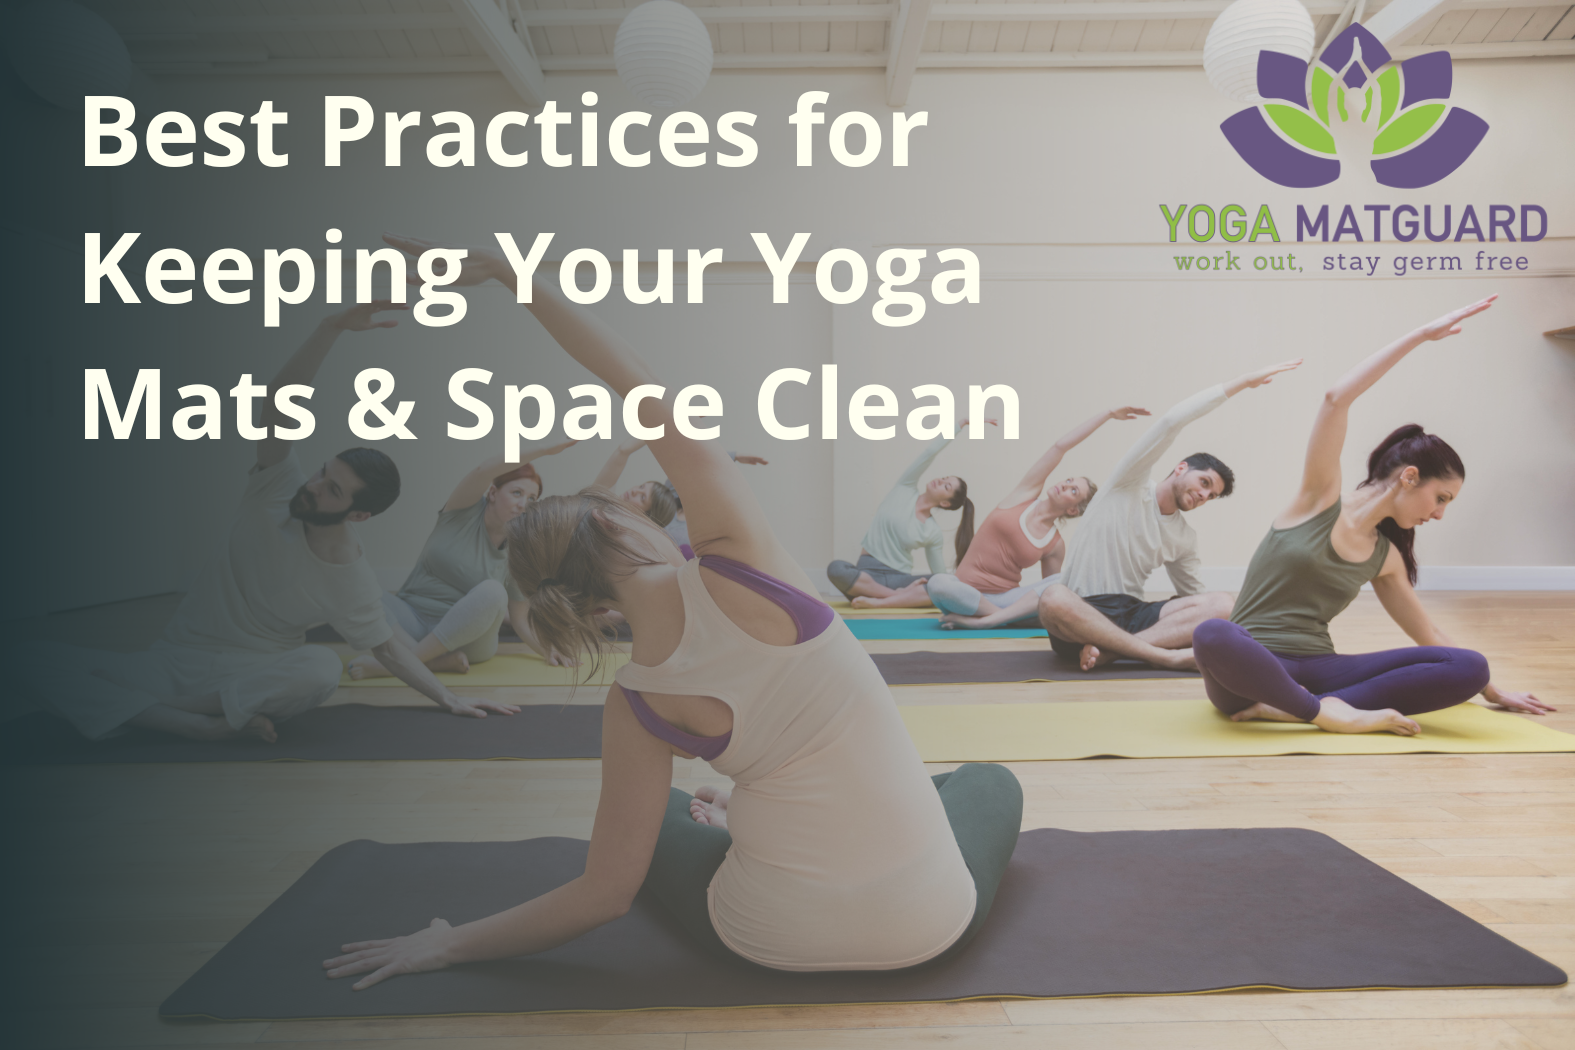 How To Clean Yoga Mat Correctly — Tips For Sanitizing Yoga Mats